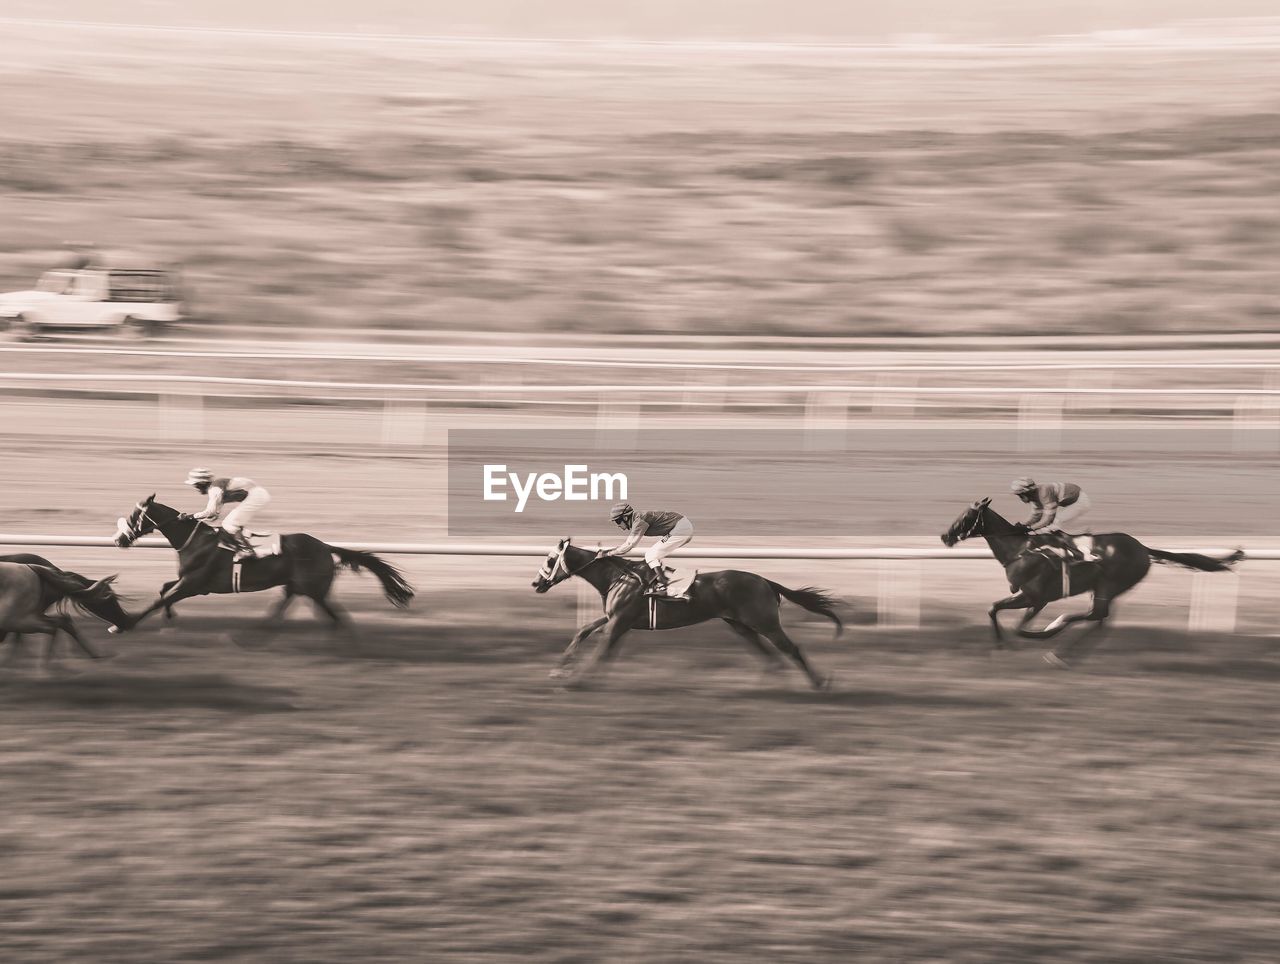 Thoroughbred race in action